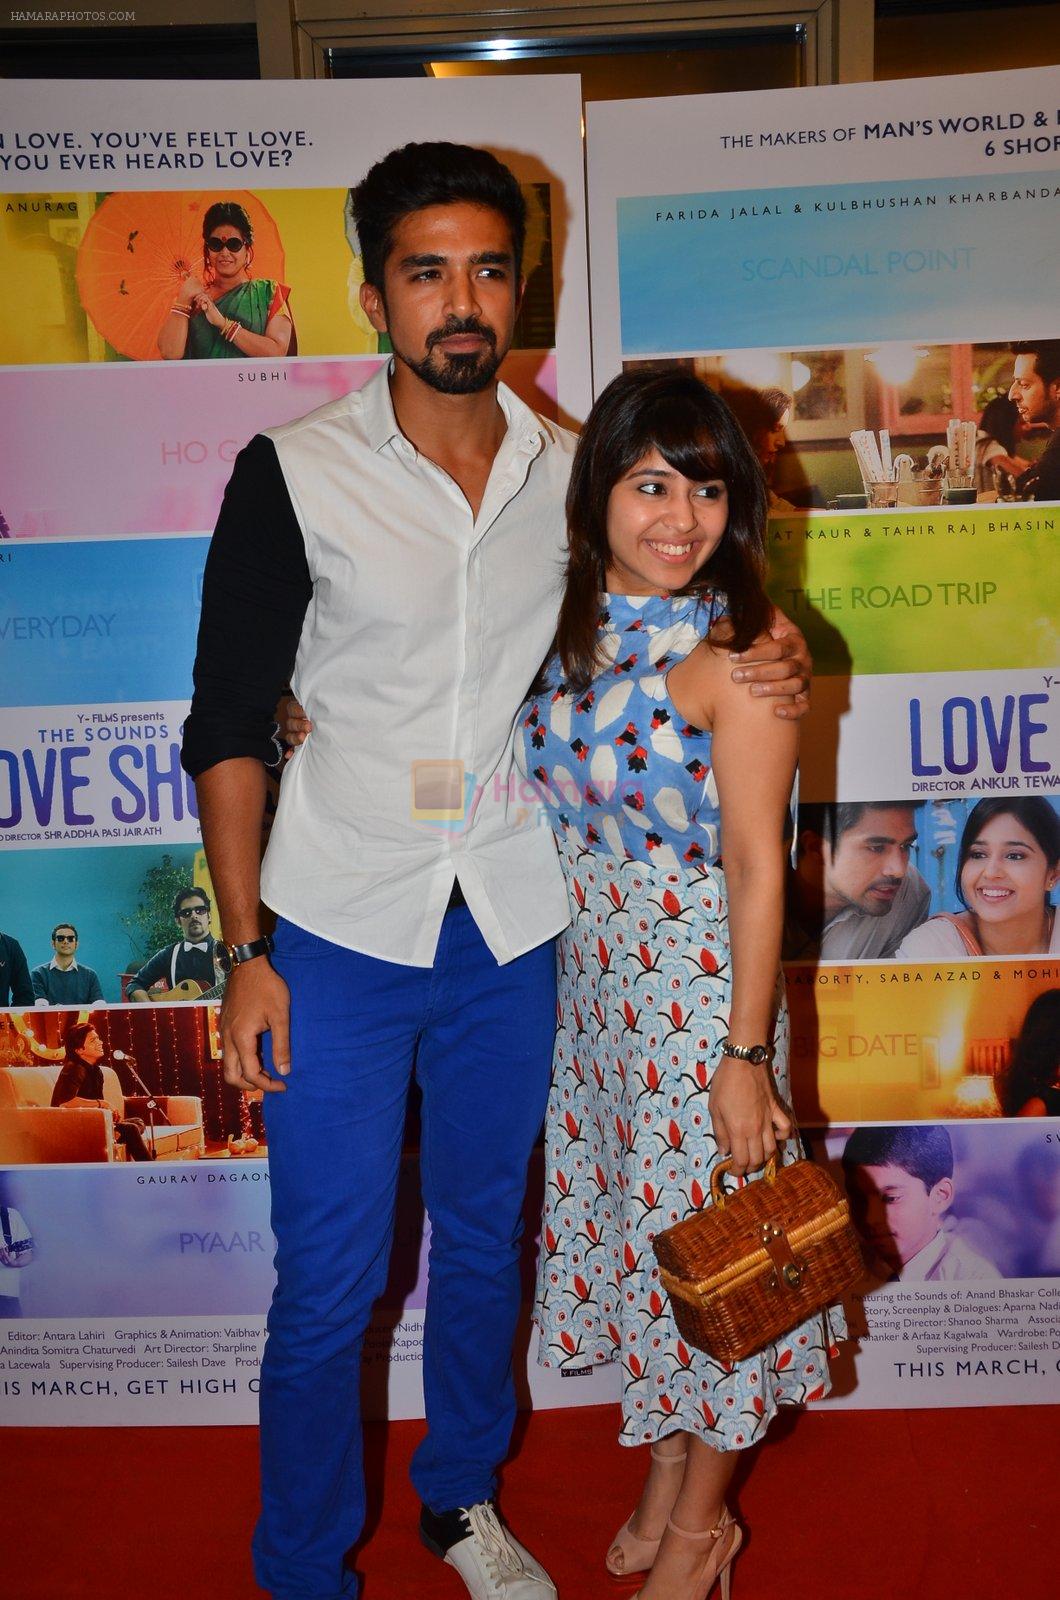 Saqib Saleem at the launch of Love Shots film launch on 7th March 2016